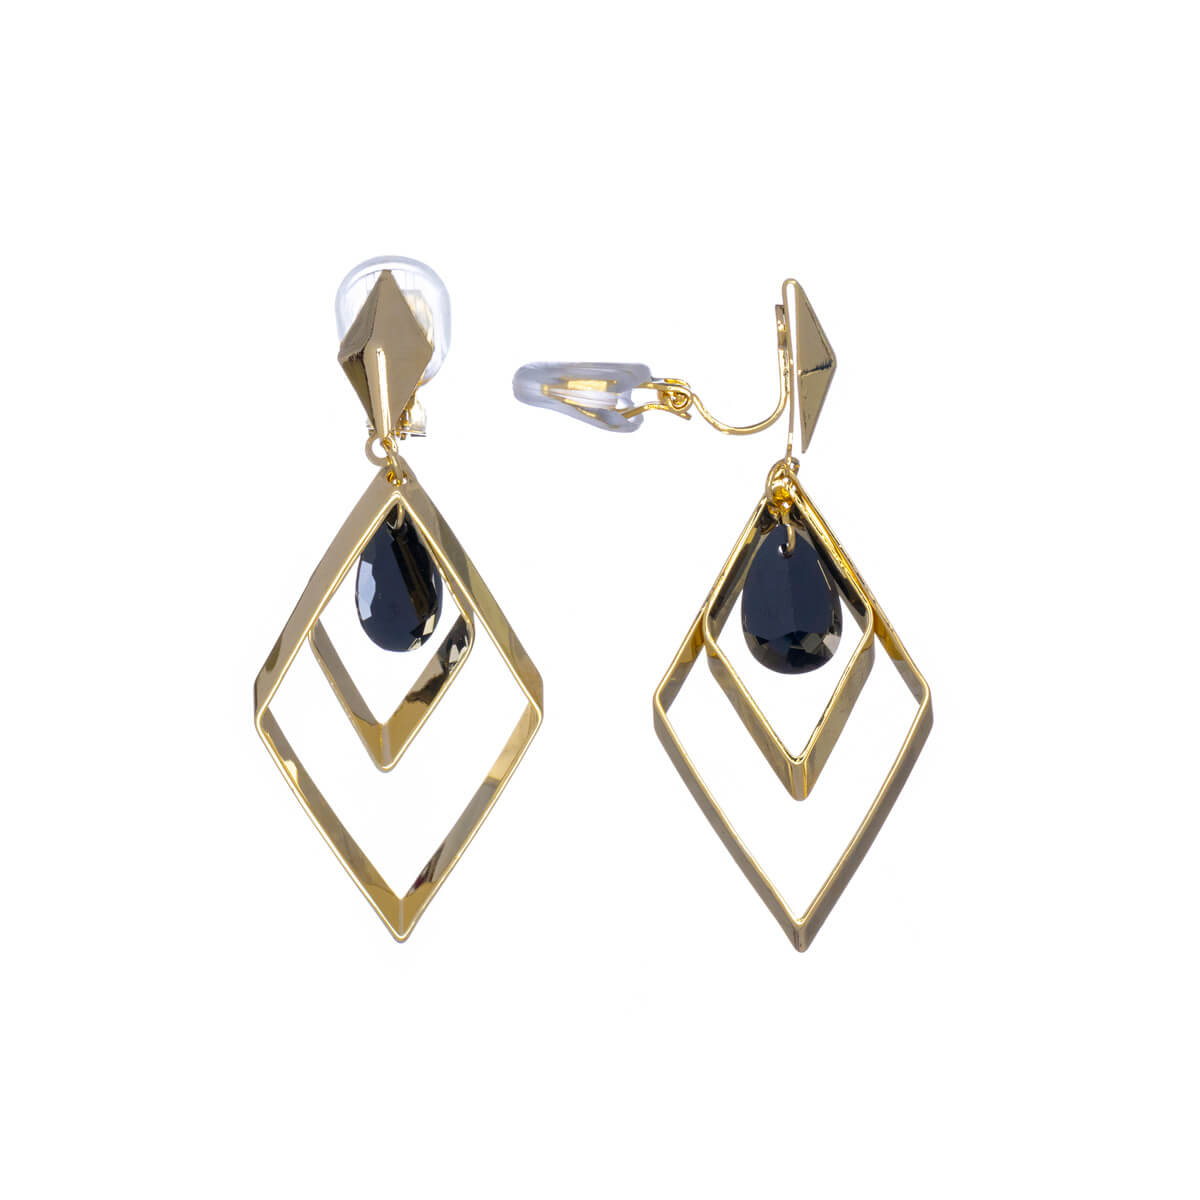 Hanging square clip earrings with black droplet